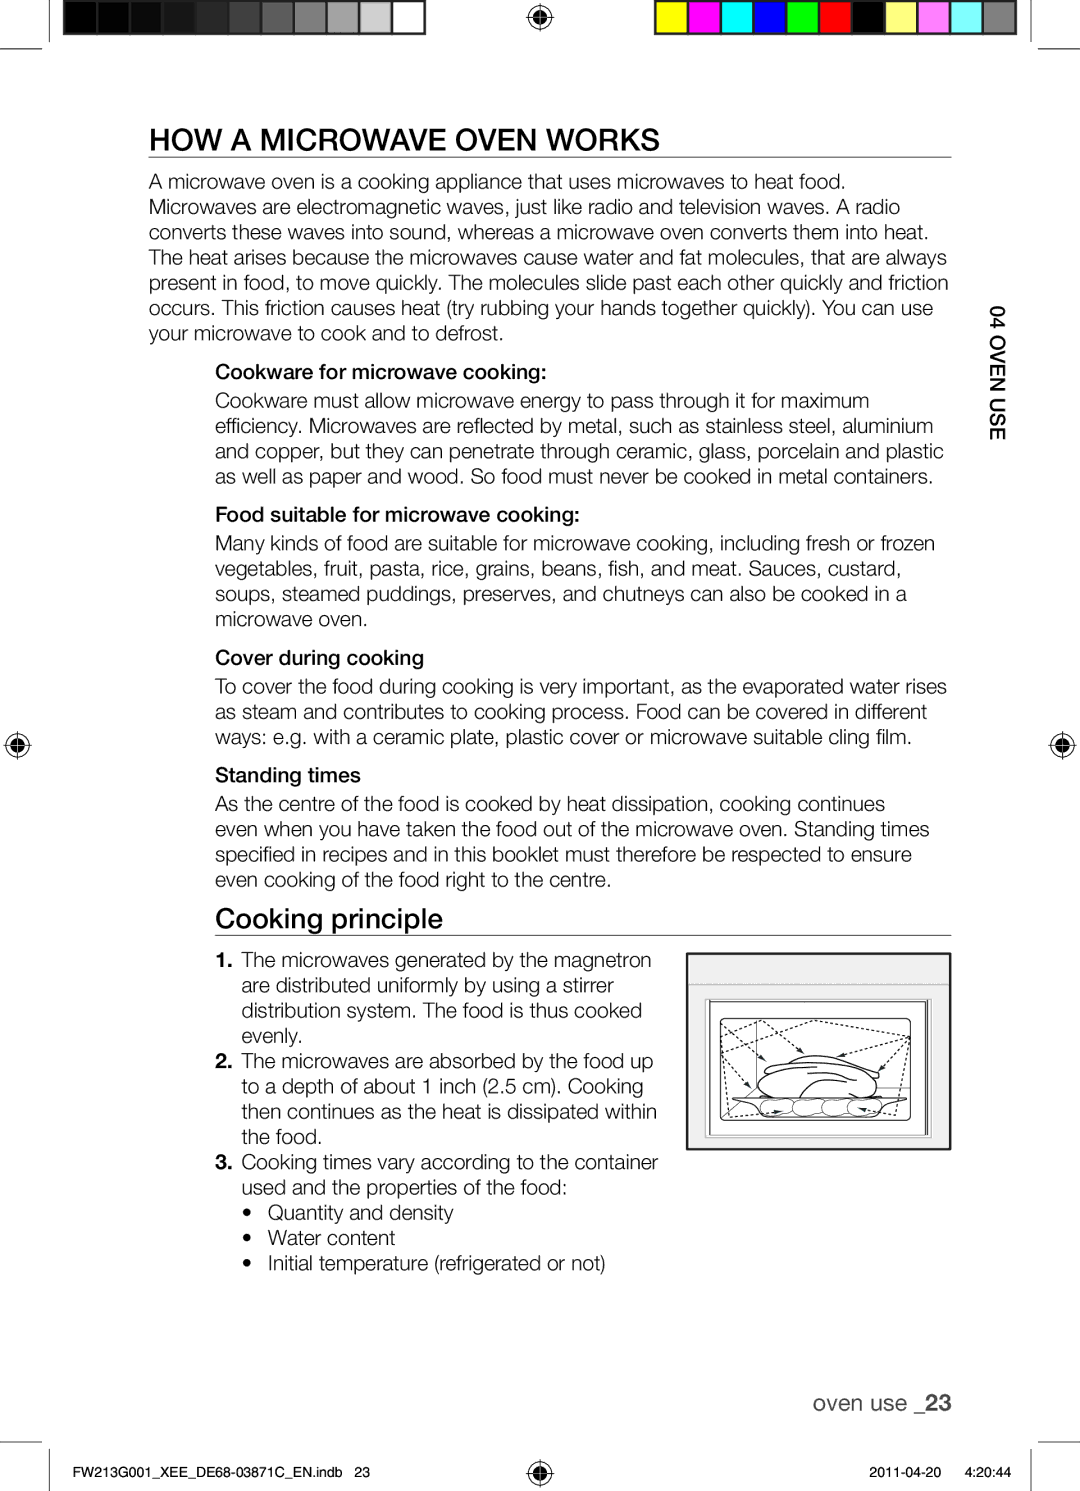 Samsung FW213G001/XEE manual HOW a Microwave Oven Works, Cooking principle 